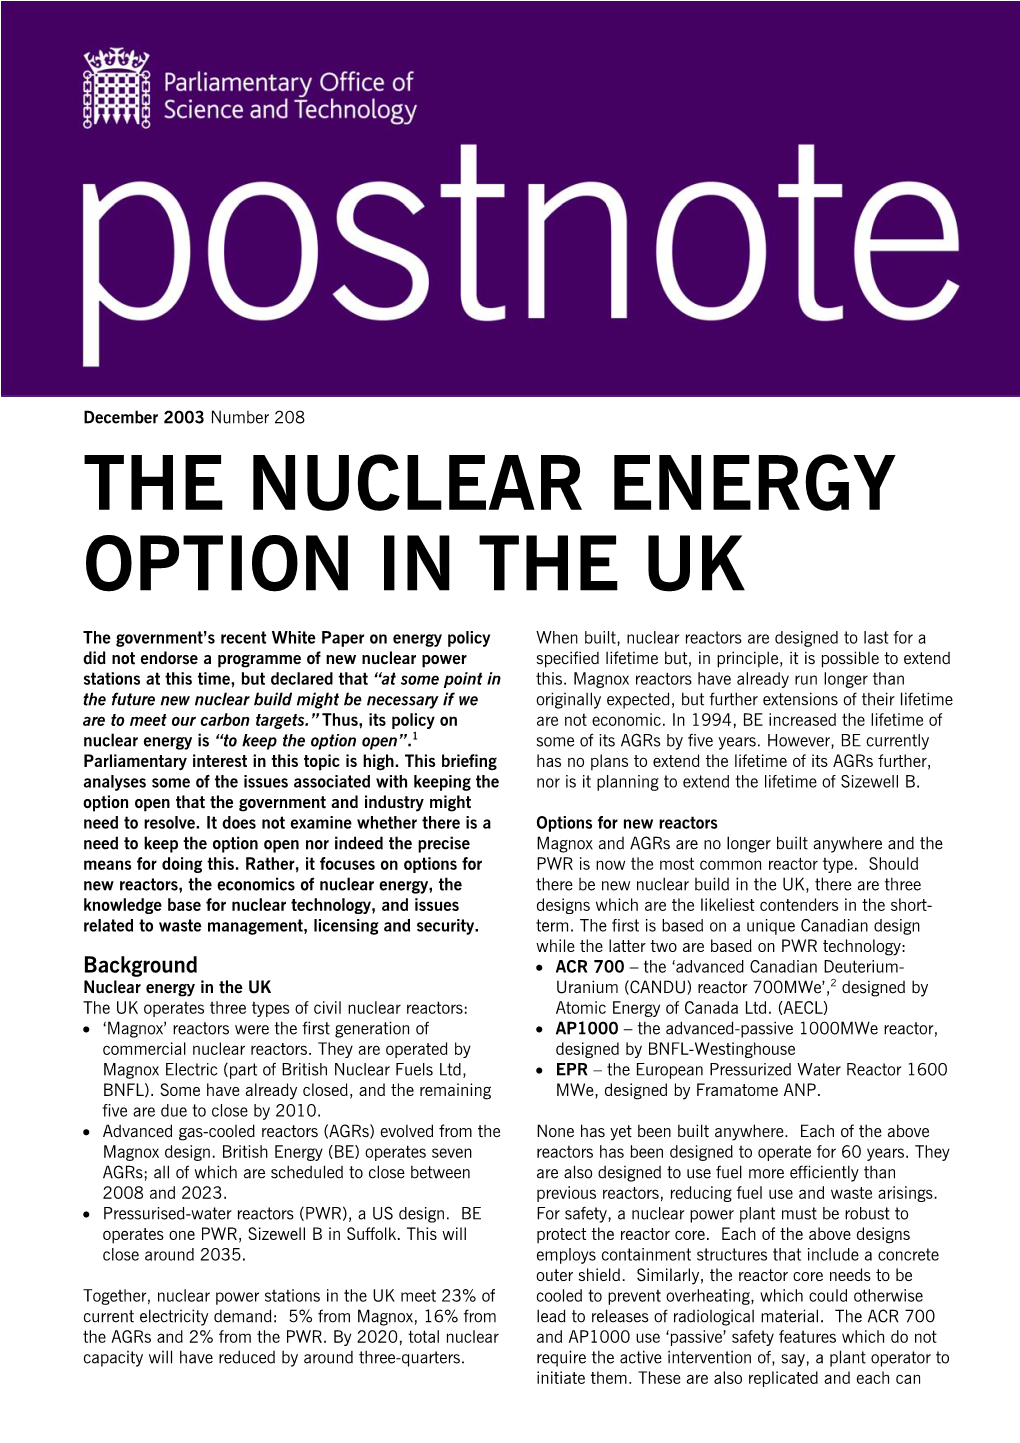 The Nuclear Energy Option in the Uk